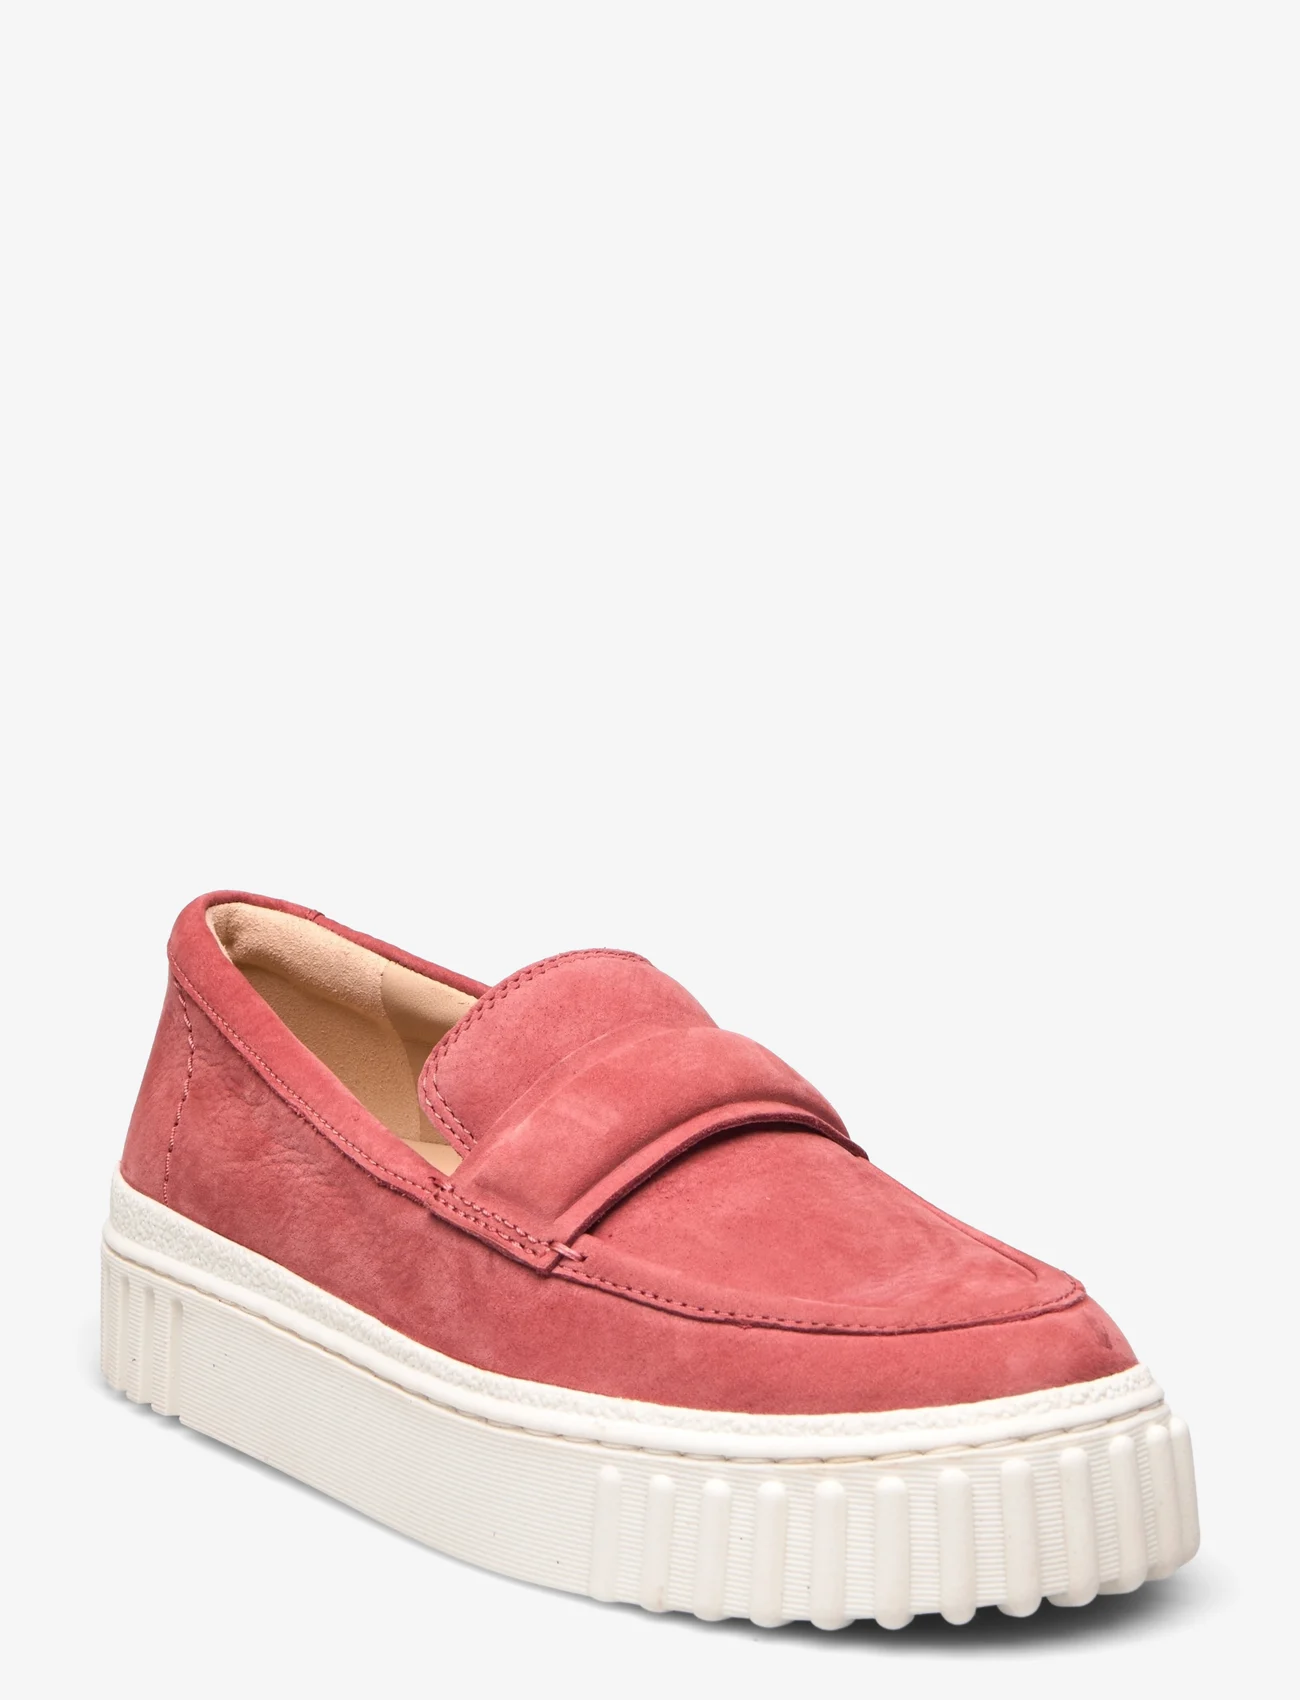 Clarks - Mayhill Cove D - gimtadienio dovanos - 4335 dusty rose nbk - 0